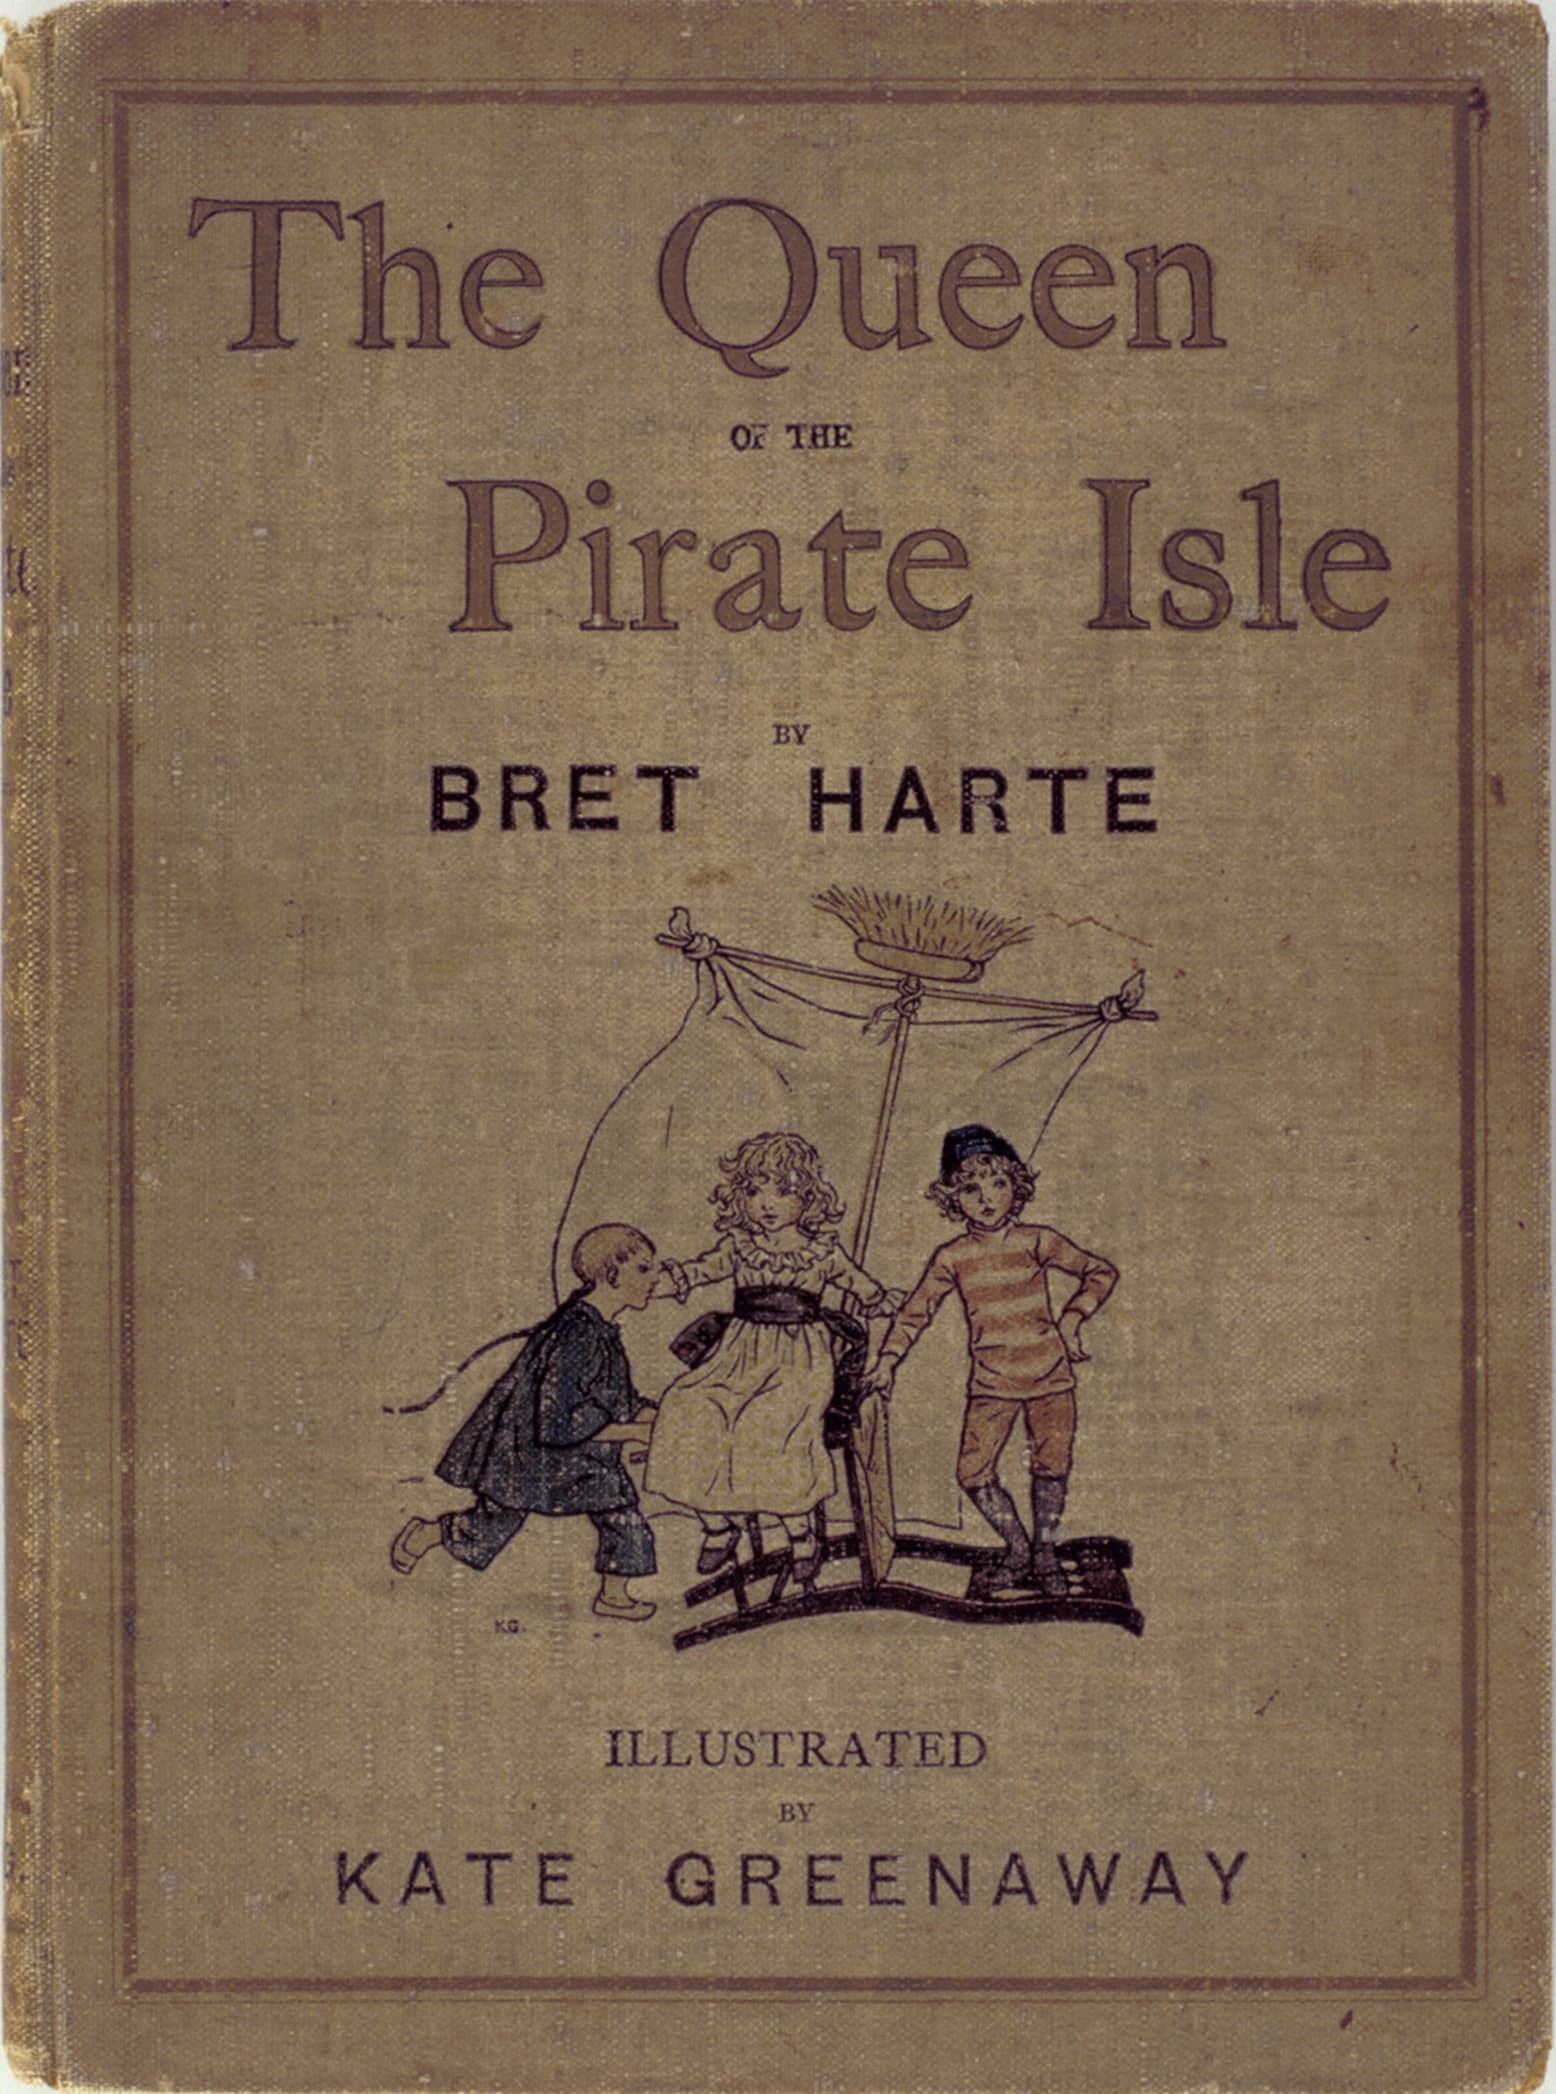 Cover of “The Queen of the Pirate Isle”